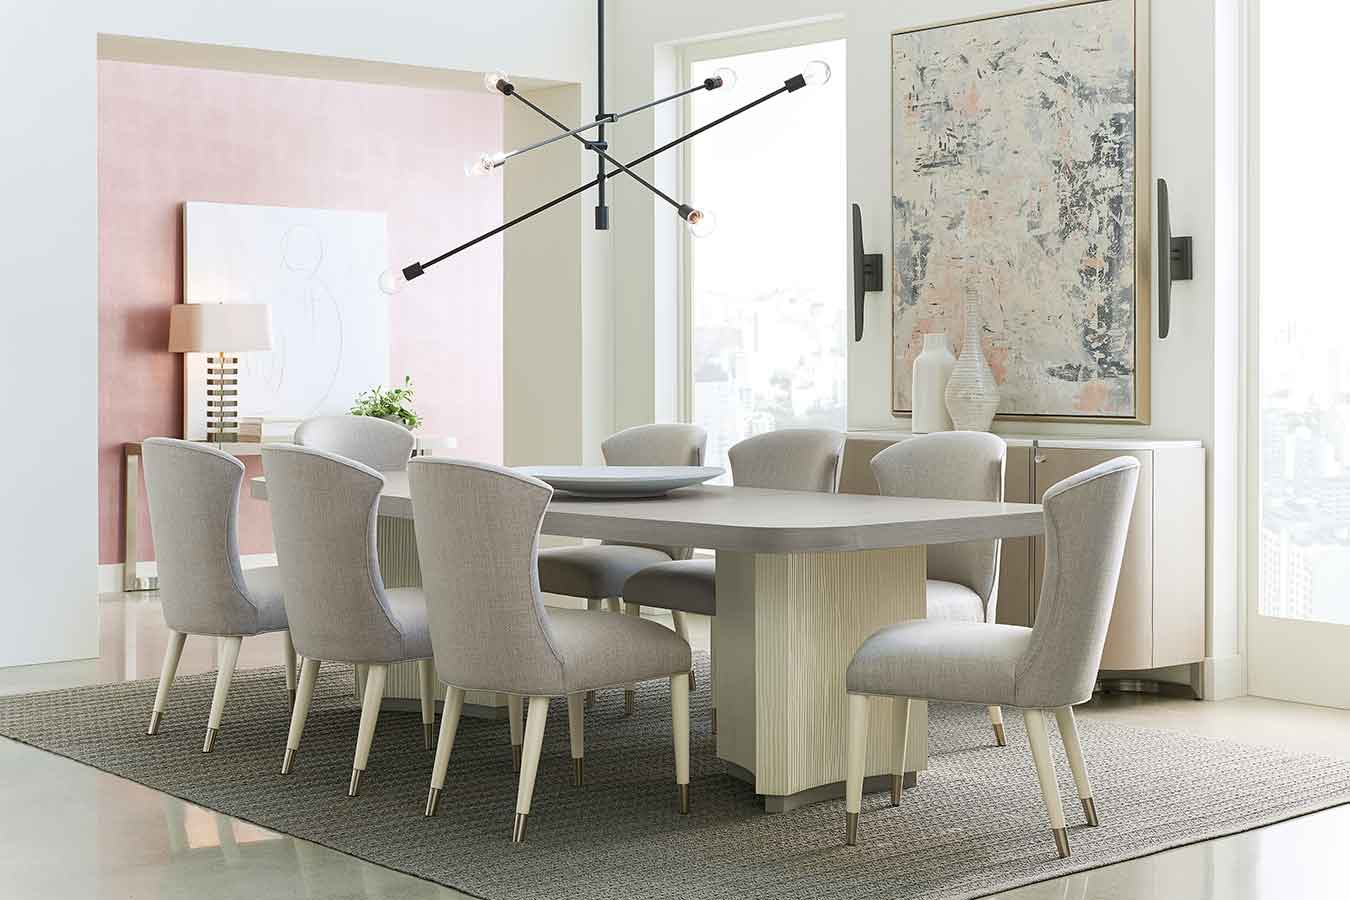 Dining Room Furniture Contemporary Luxury Exclusive Modern pertaining to dimensions 1350 X 900